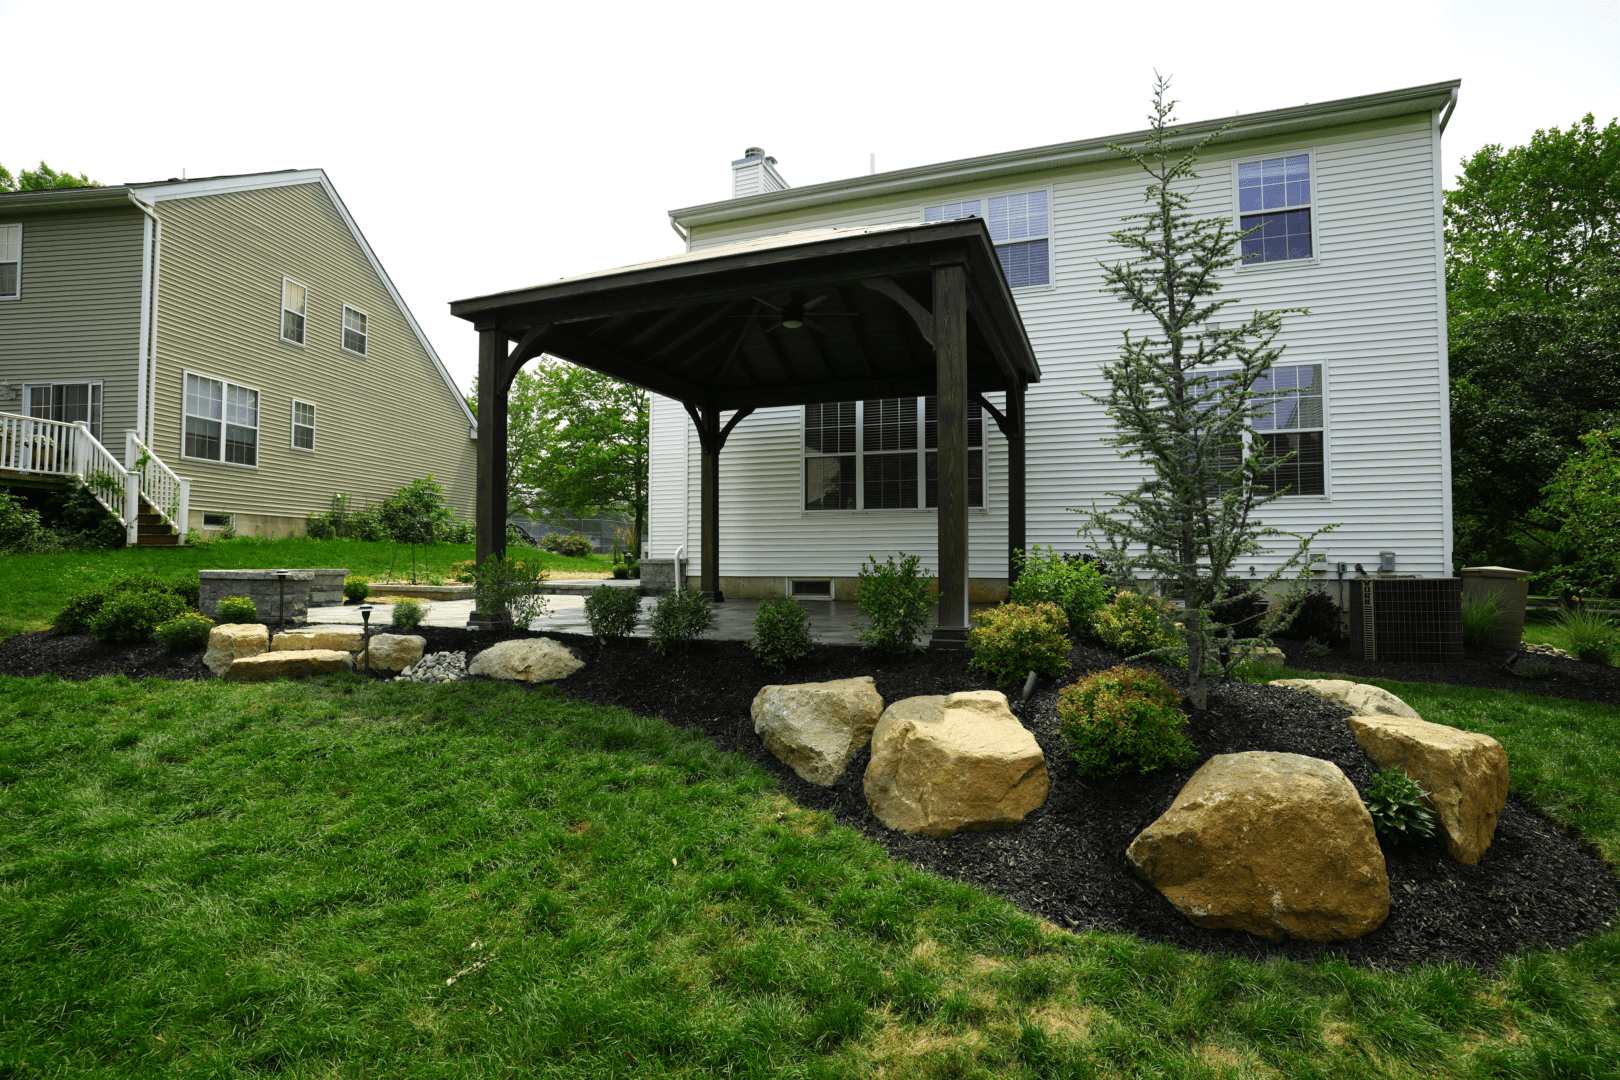 A backyard with a rock garden and gazebo, designed and maintained by experienced Planting Professionals.